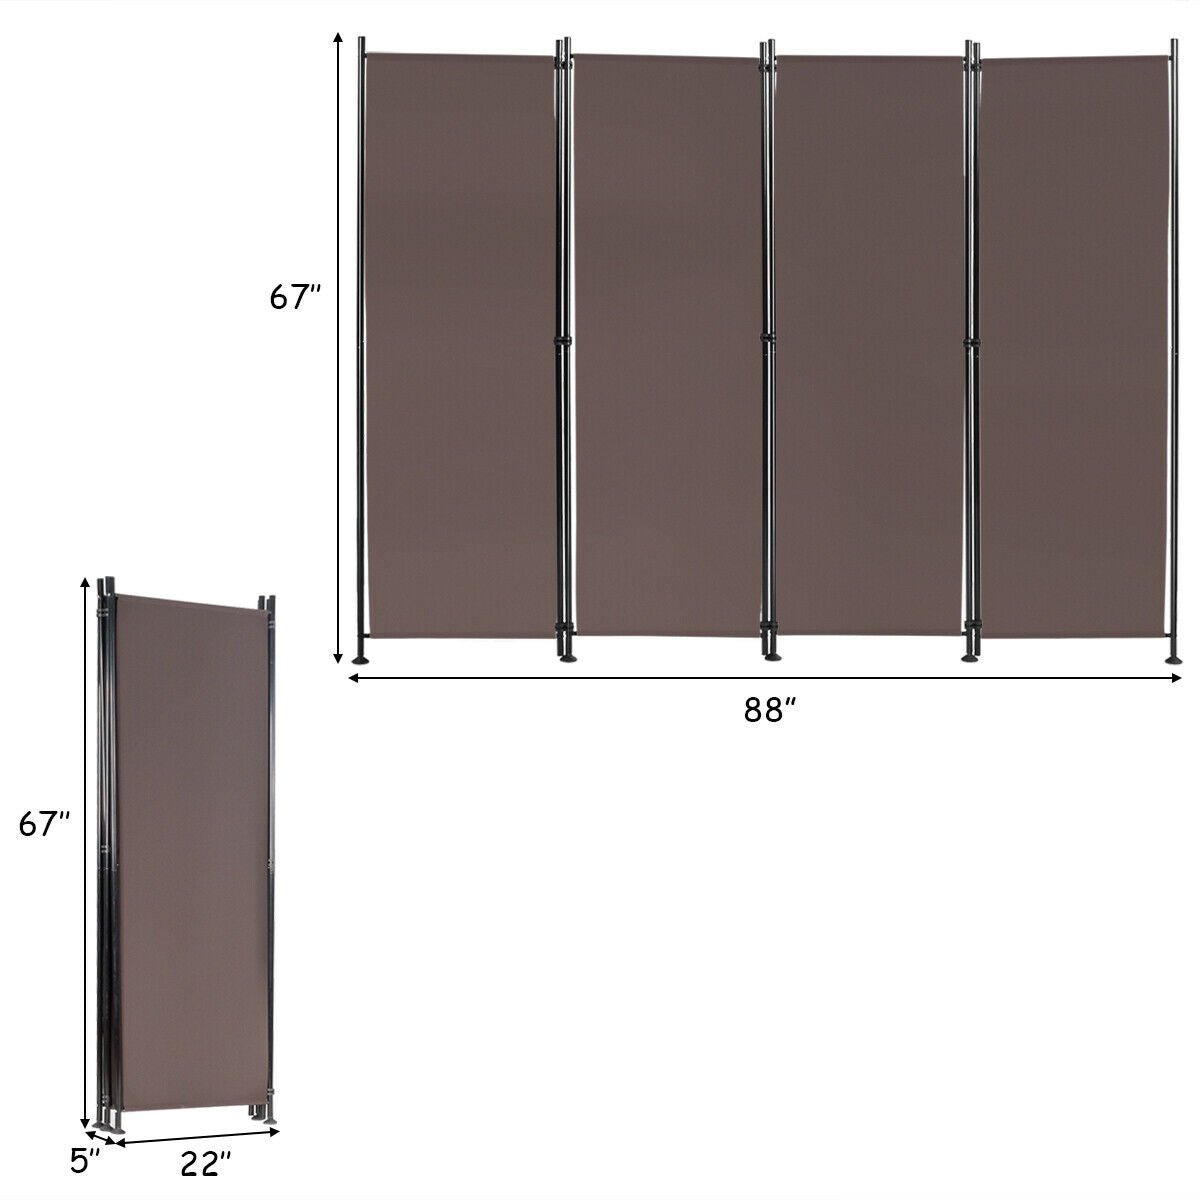 4-Panel Room Divider Folding Privacy Screen with Adjustable Foot Pads